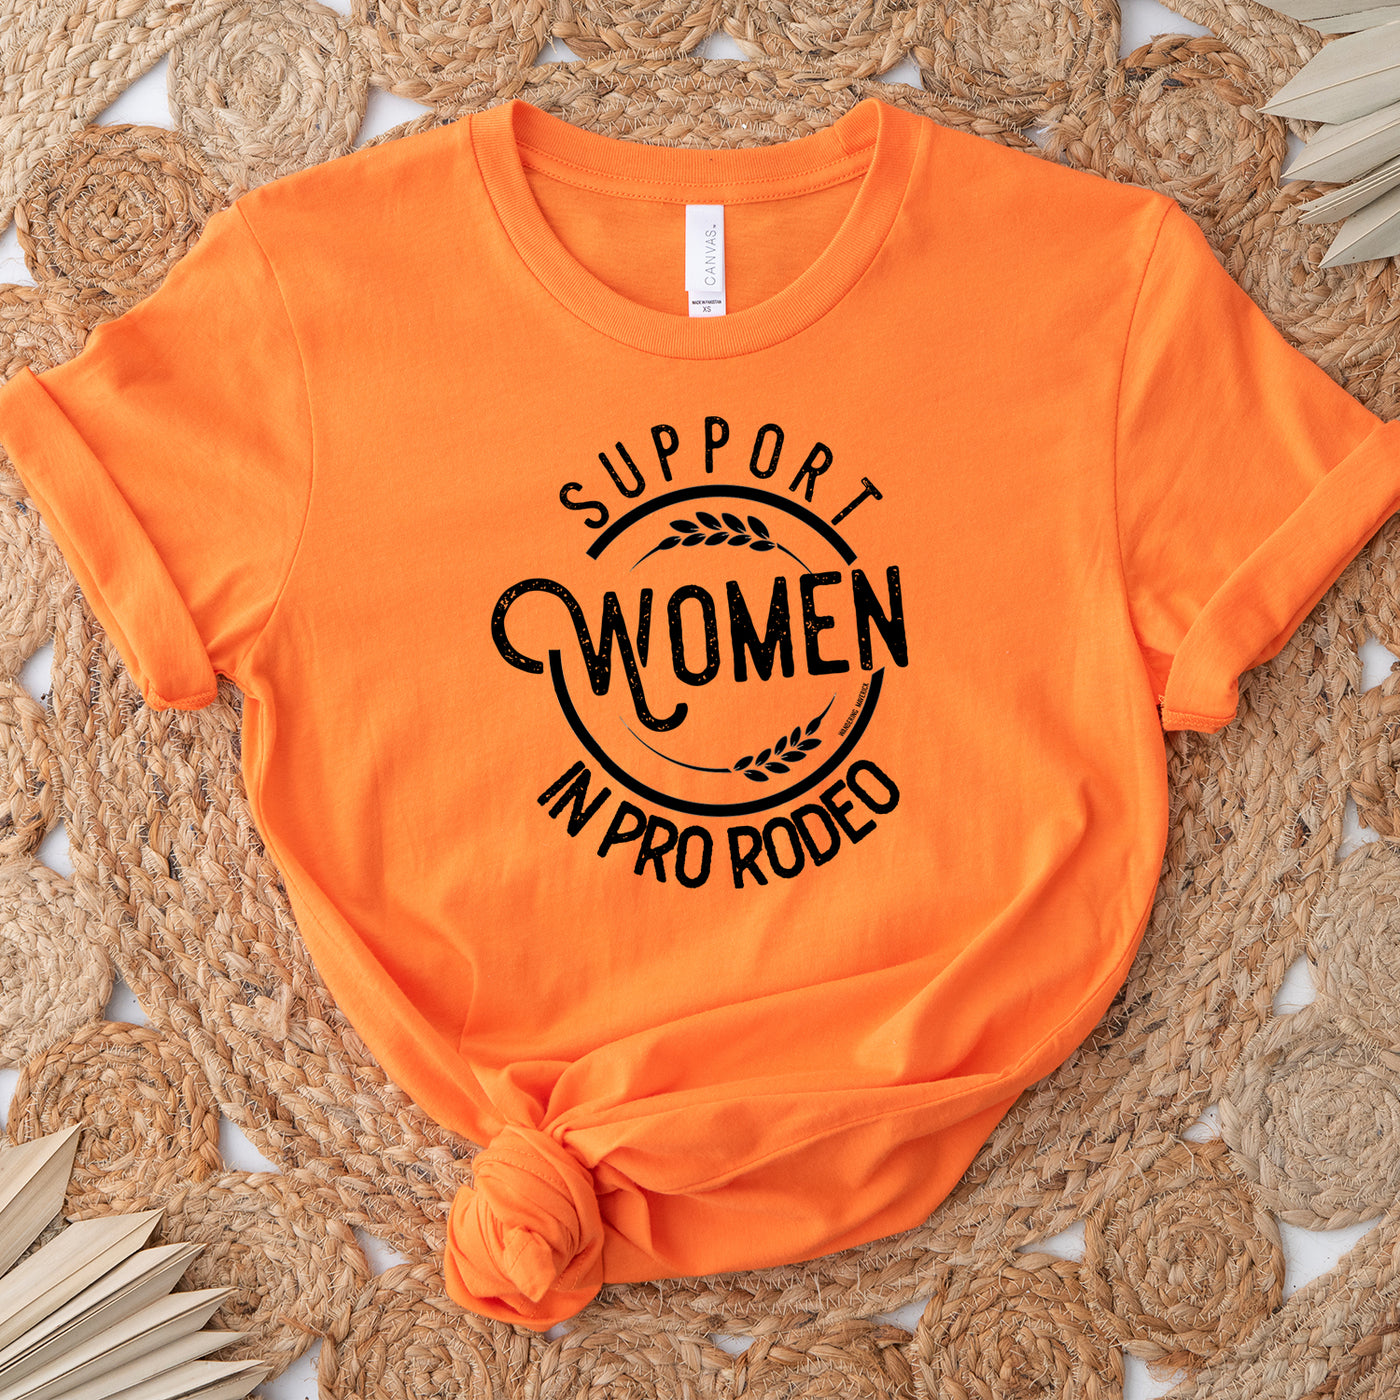 Support Women In Pro Rodeo T-Shirt (XS-4XL) - Multiple Colors!